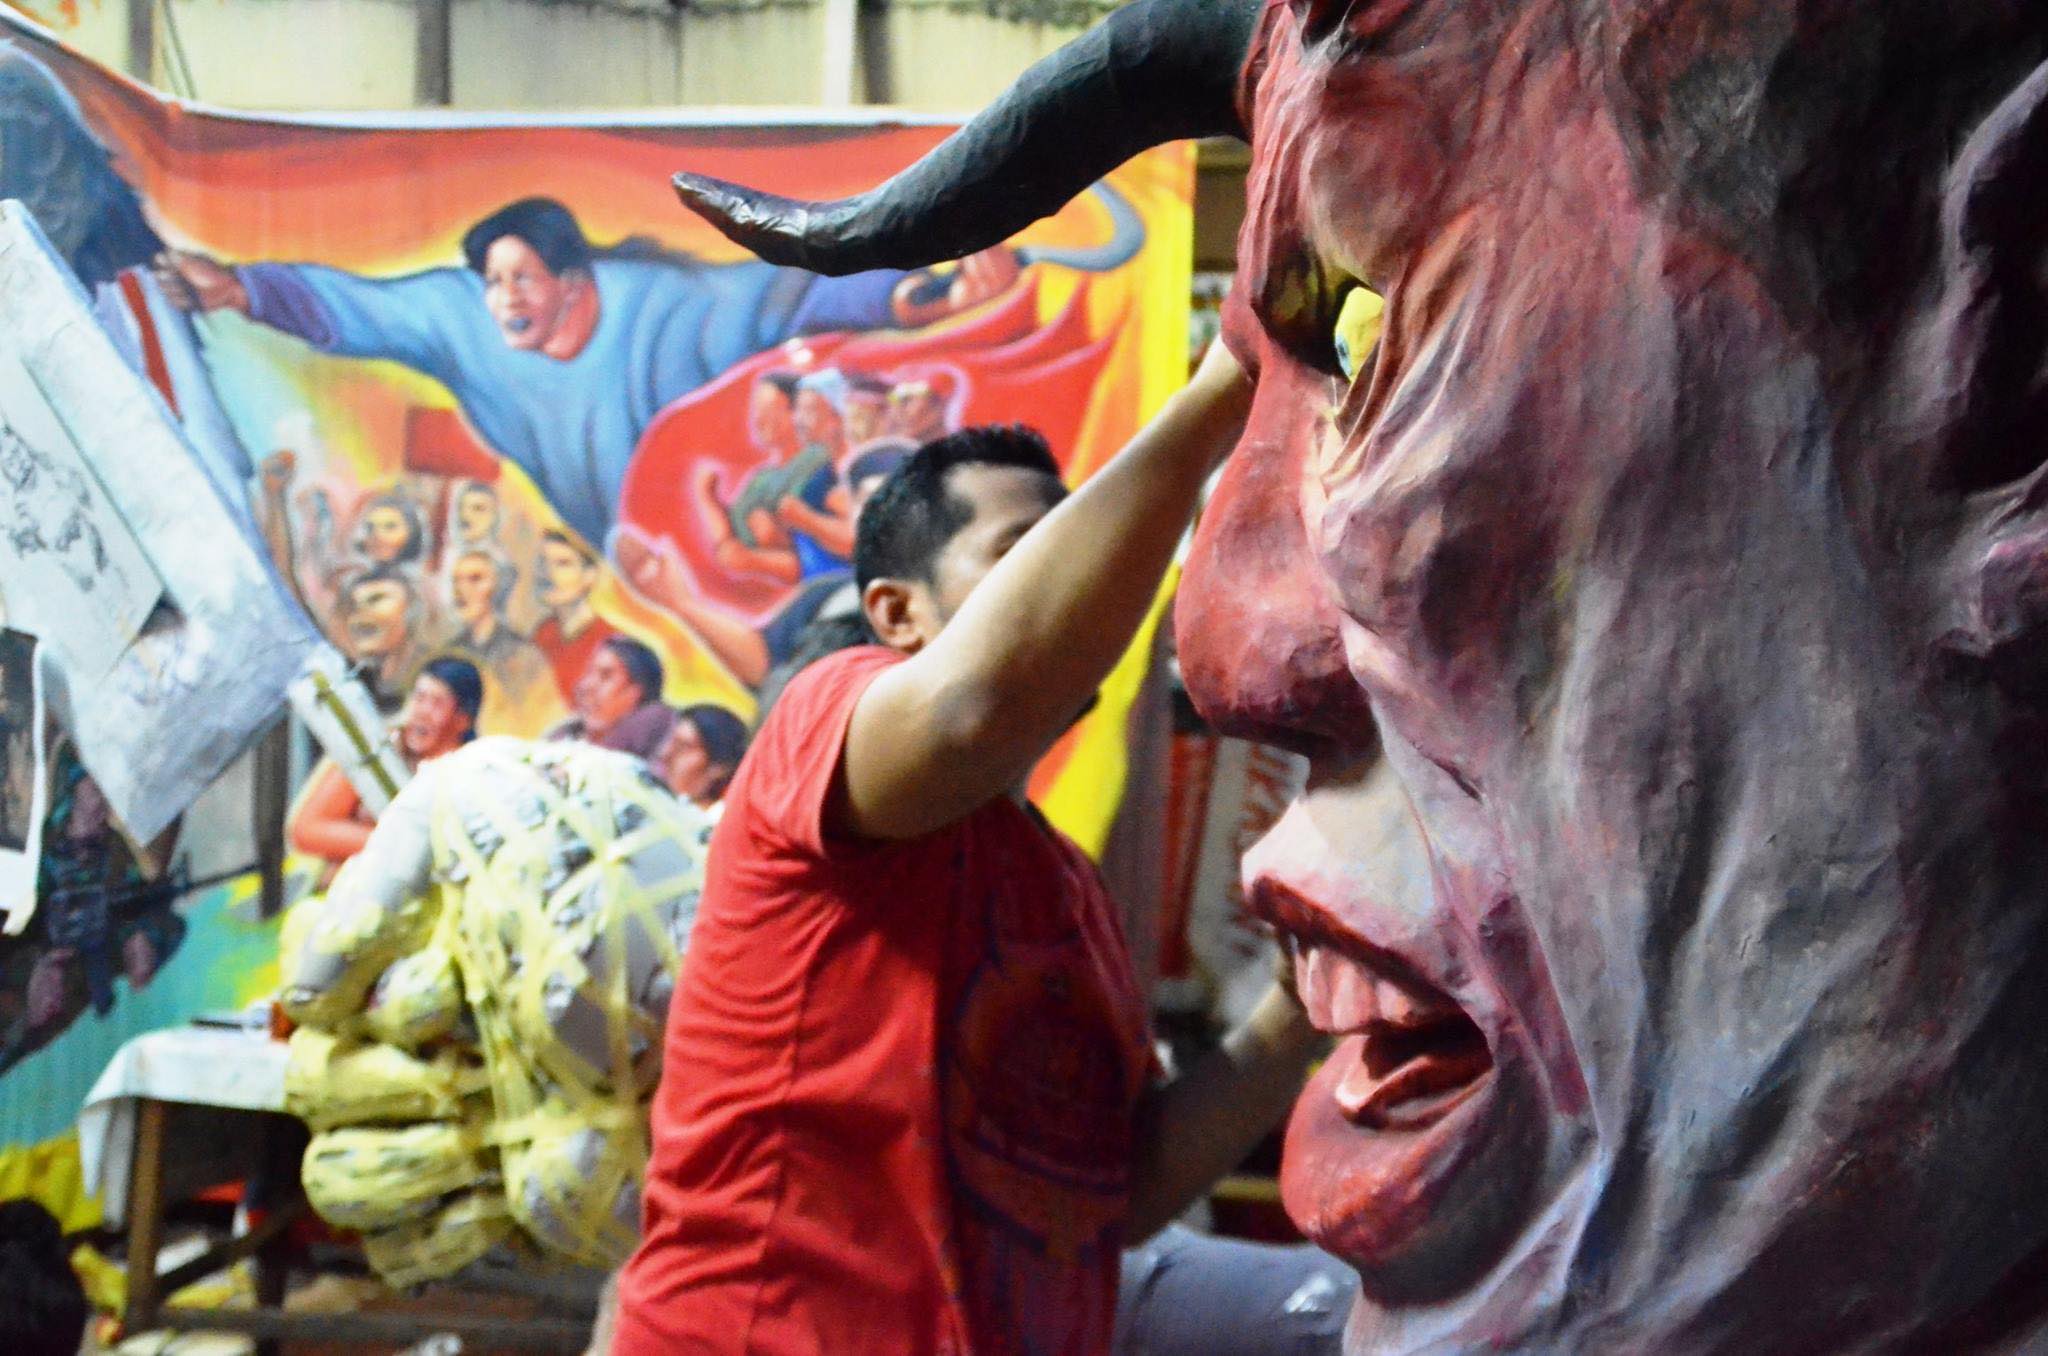 'BUTCHER' OF JOBS. On May 1, 2016, militant workers and their supporters will converge at various points in Manila before marching to Mendiola, where they will burn President Benigno Aquino III's effigy, which depicts him as a "butcher of jobs". Photo by Buhay Manggagawa   